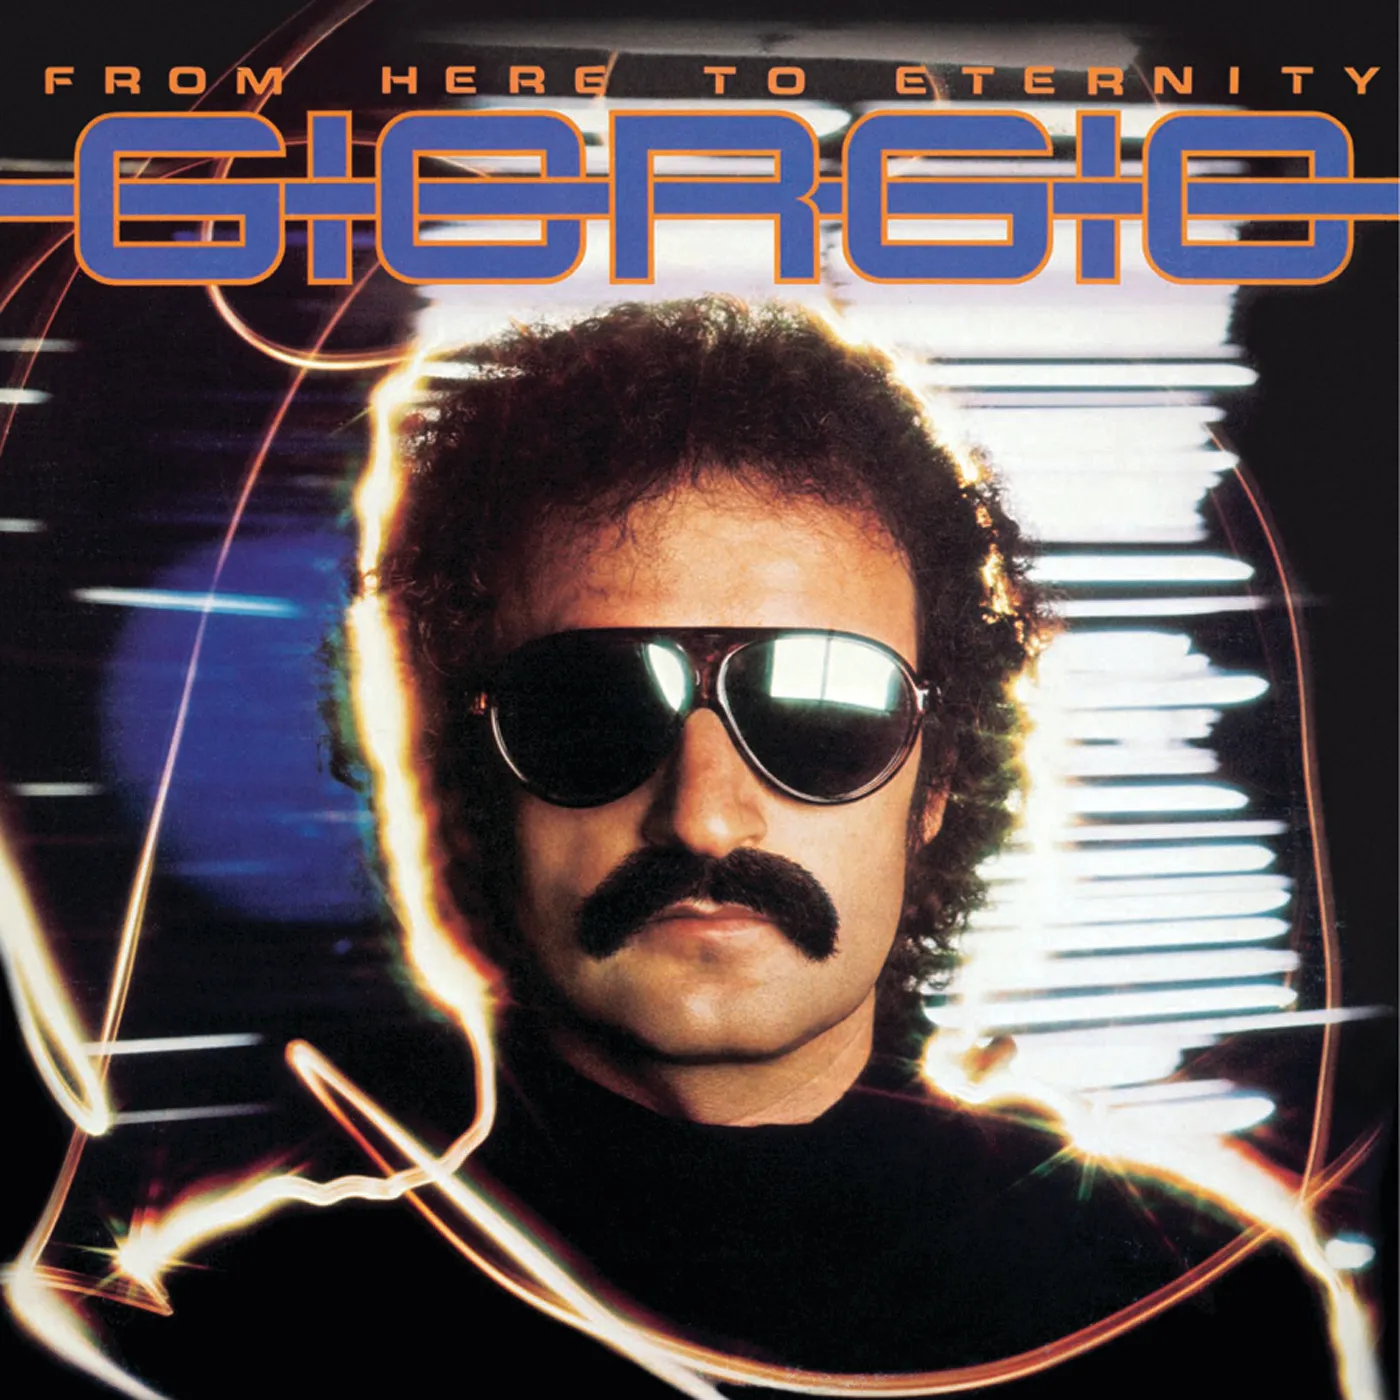 <strong>Giorgio Moroder - From Here To Eternity</strong> (Vinyl LP - black)